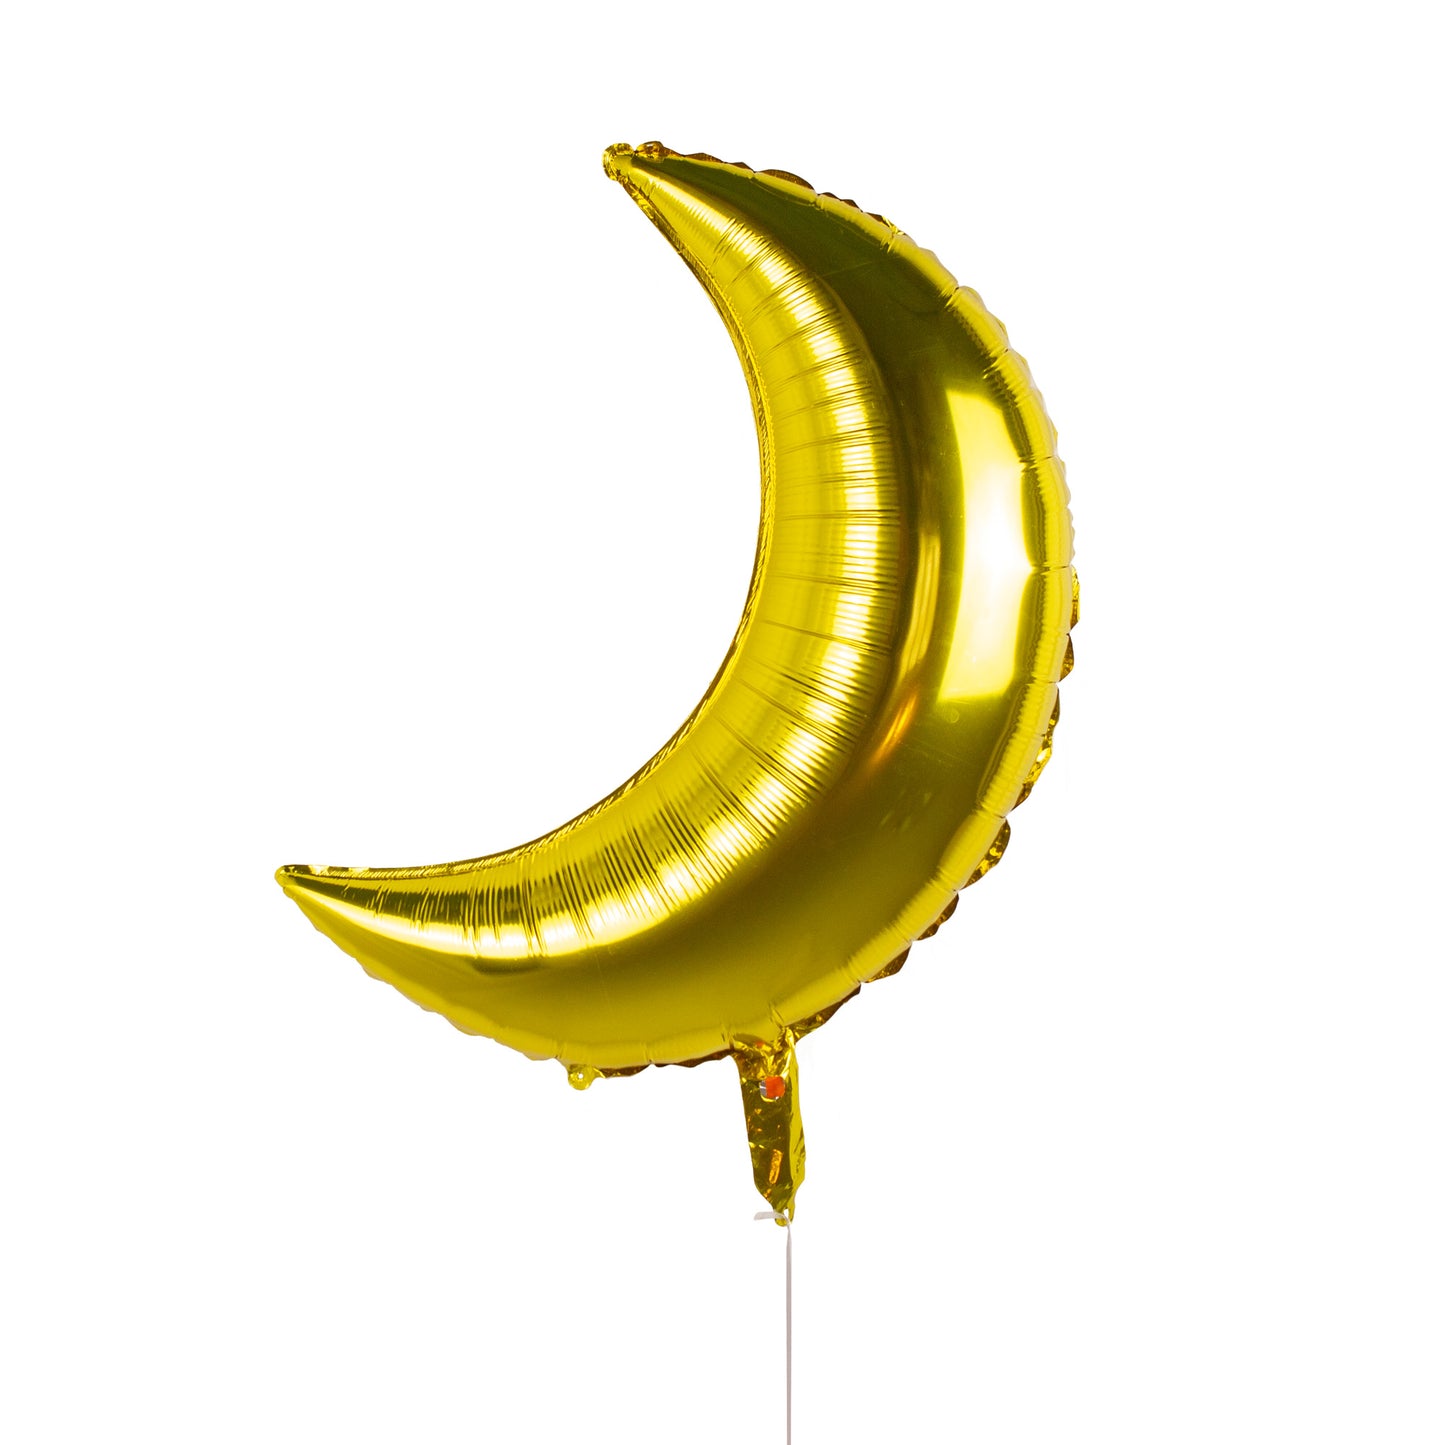 Crescent Moon Foil Balloons - Pack of 3